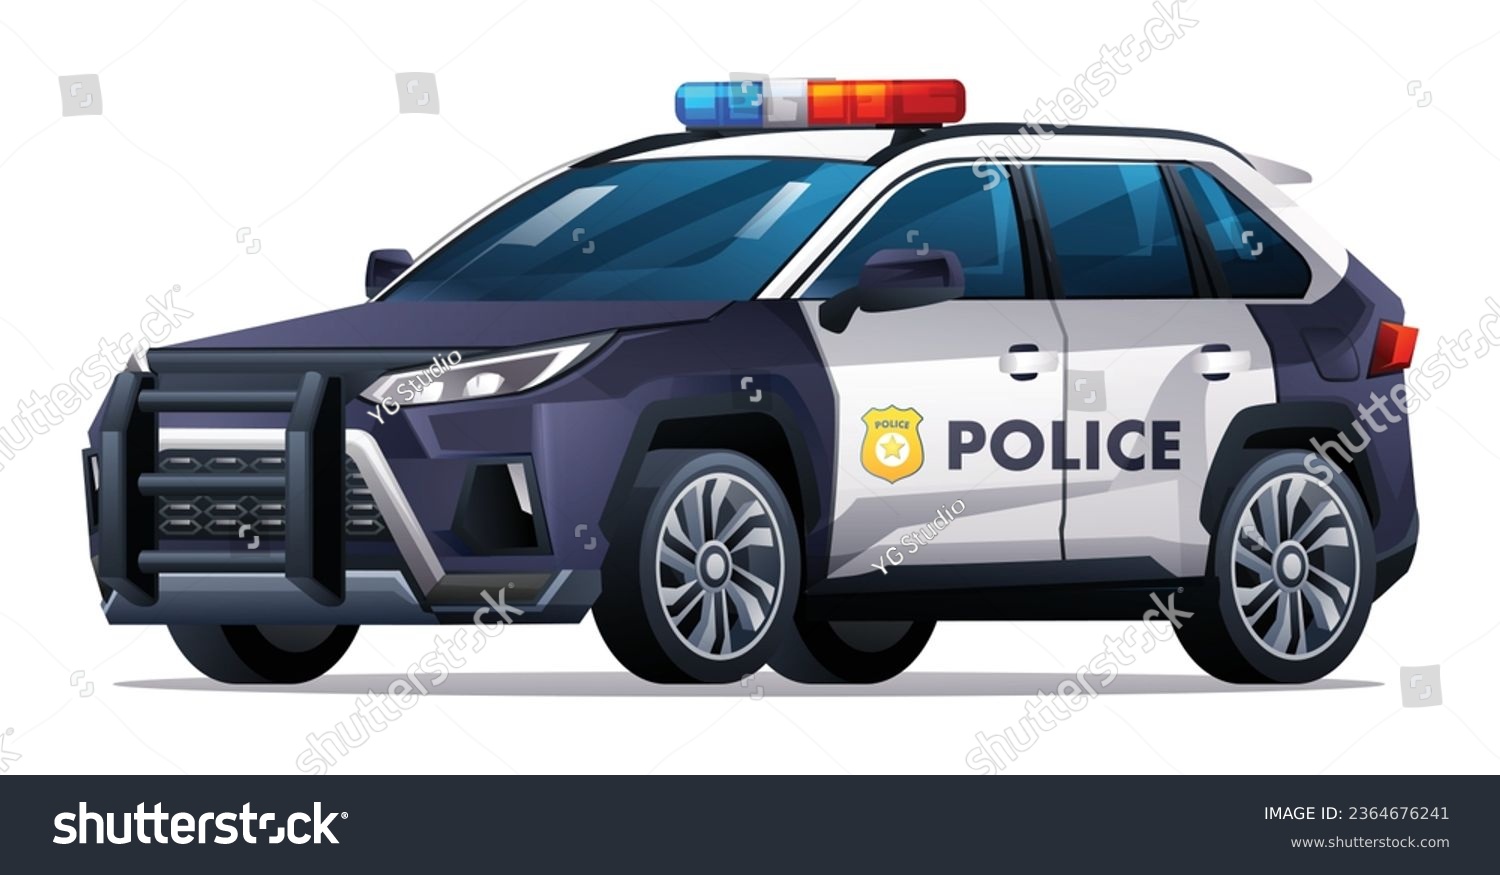 SVG of Police car vector illustration. Patrol official vehicle, suv car isolated on white background svg